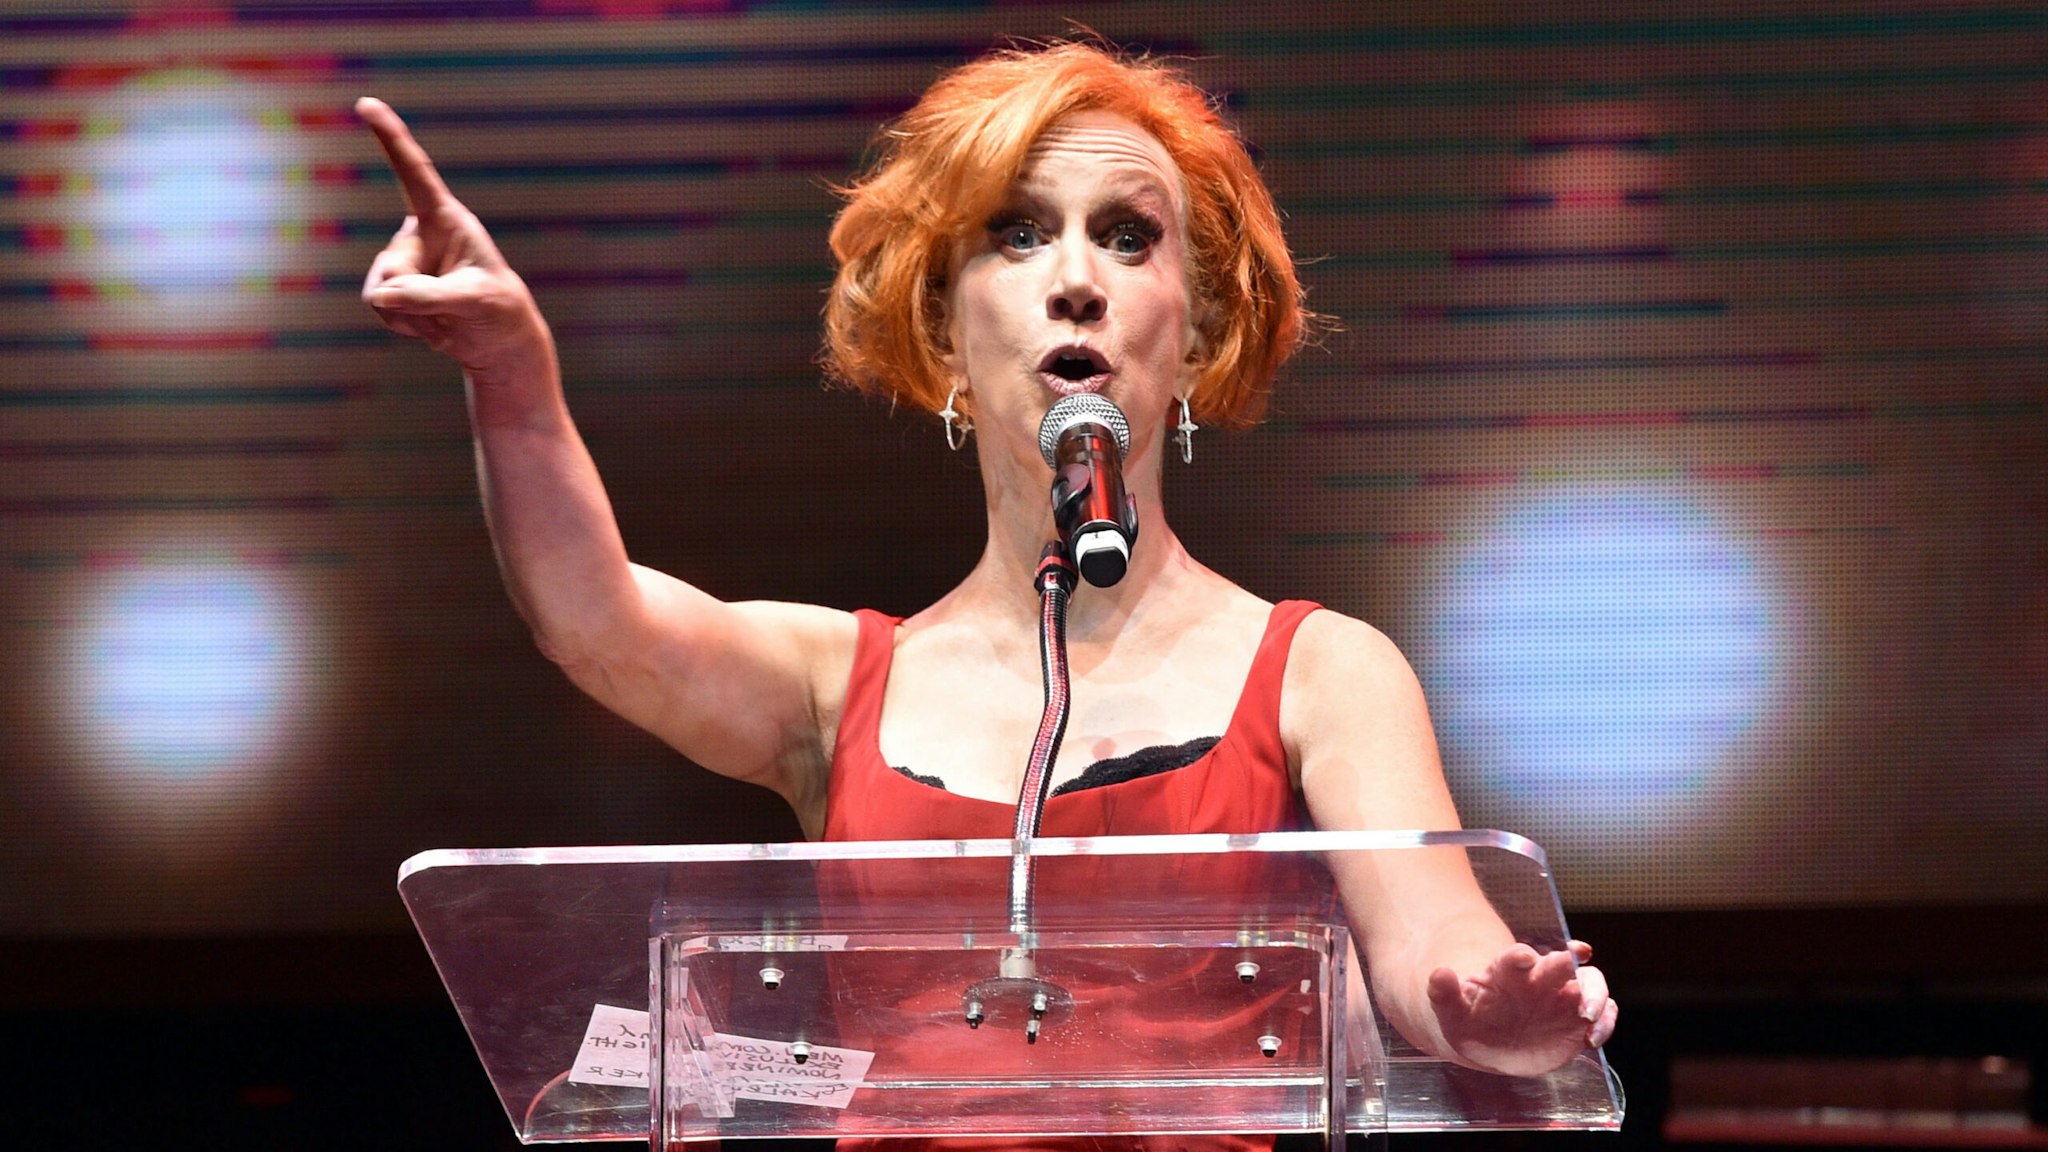 LOS ANGELES, CALIFORNIA - JANUARY 12: Kathy Griffin speaks onstage at Gay Porn's Biggest Night - Str8UpGayPorn Awards, Hosted By Kathy Griffin at Avalon Theater on January 12, 2020 in Los Angeles, California.